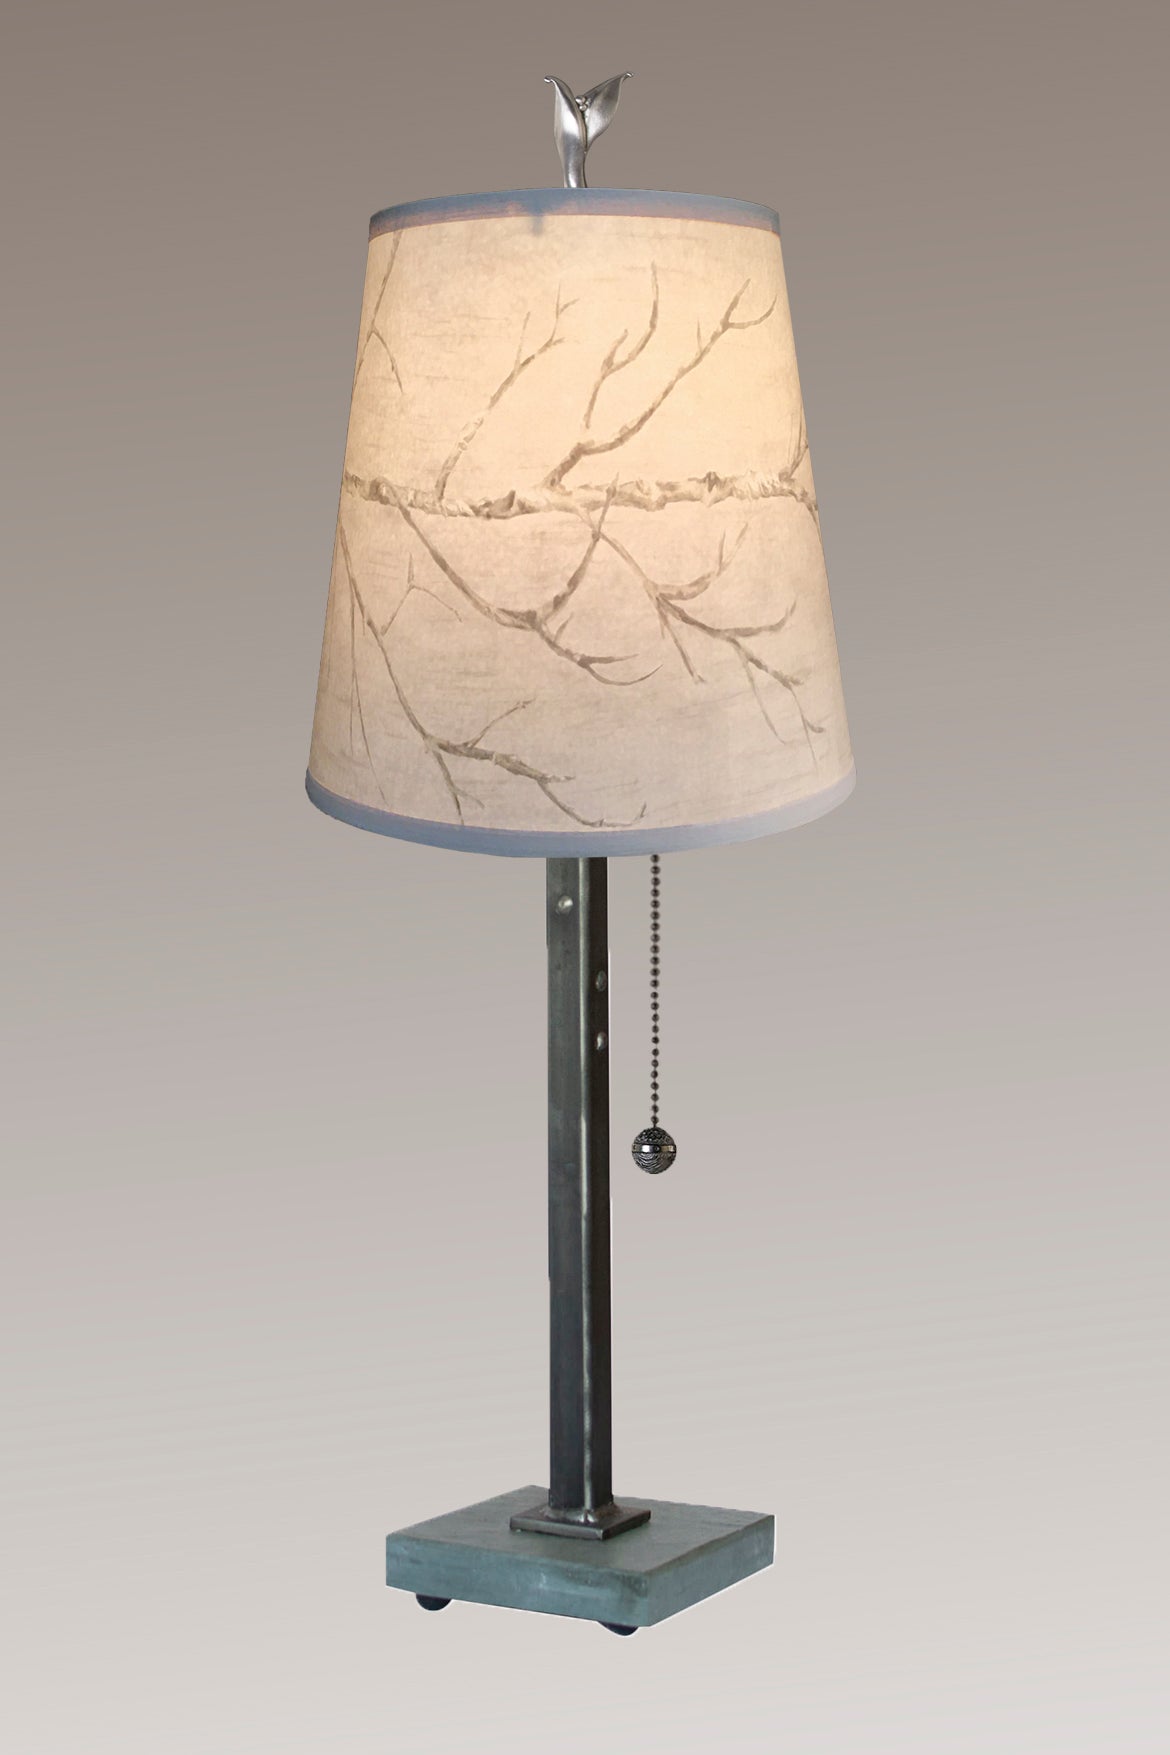 Janna Ugone & Co Table Lamps Steel Table Lamp with Small Drum Shade in Sweeping Branch